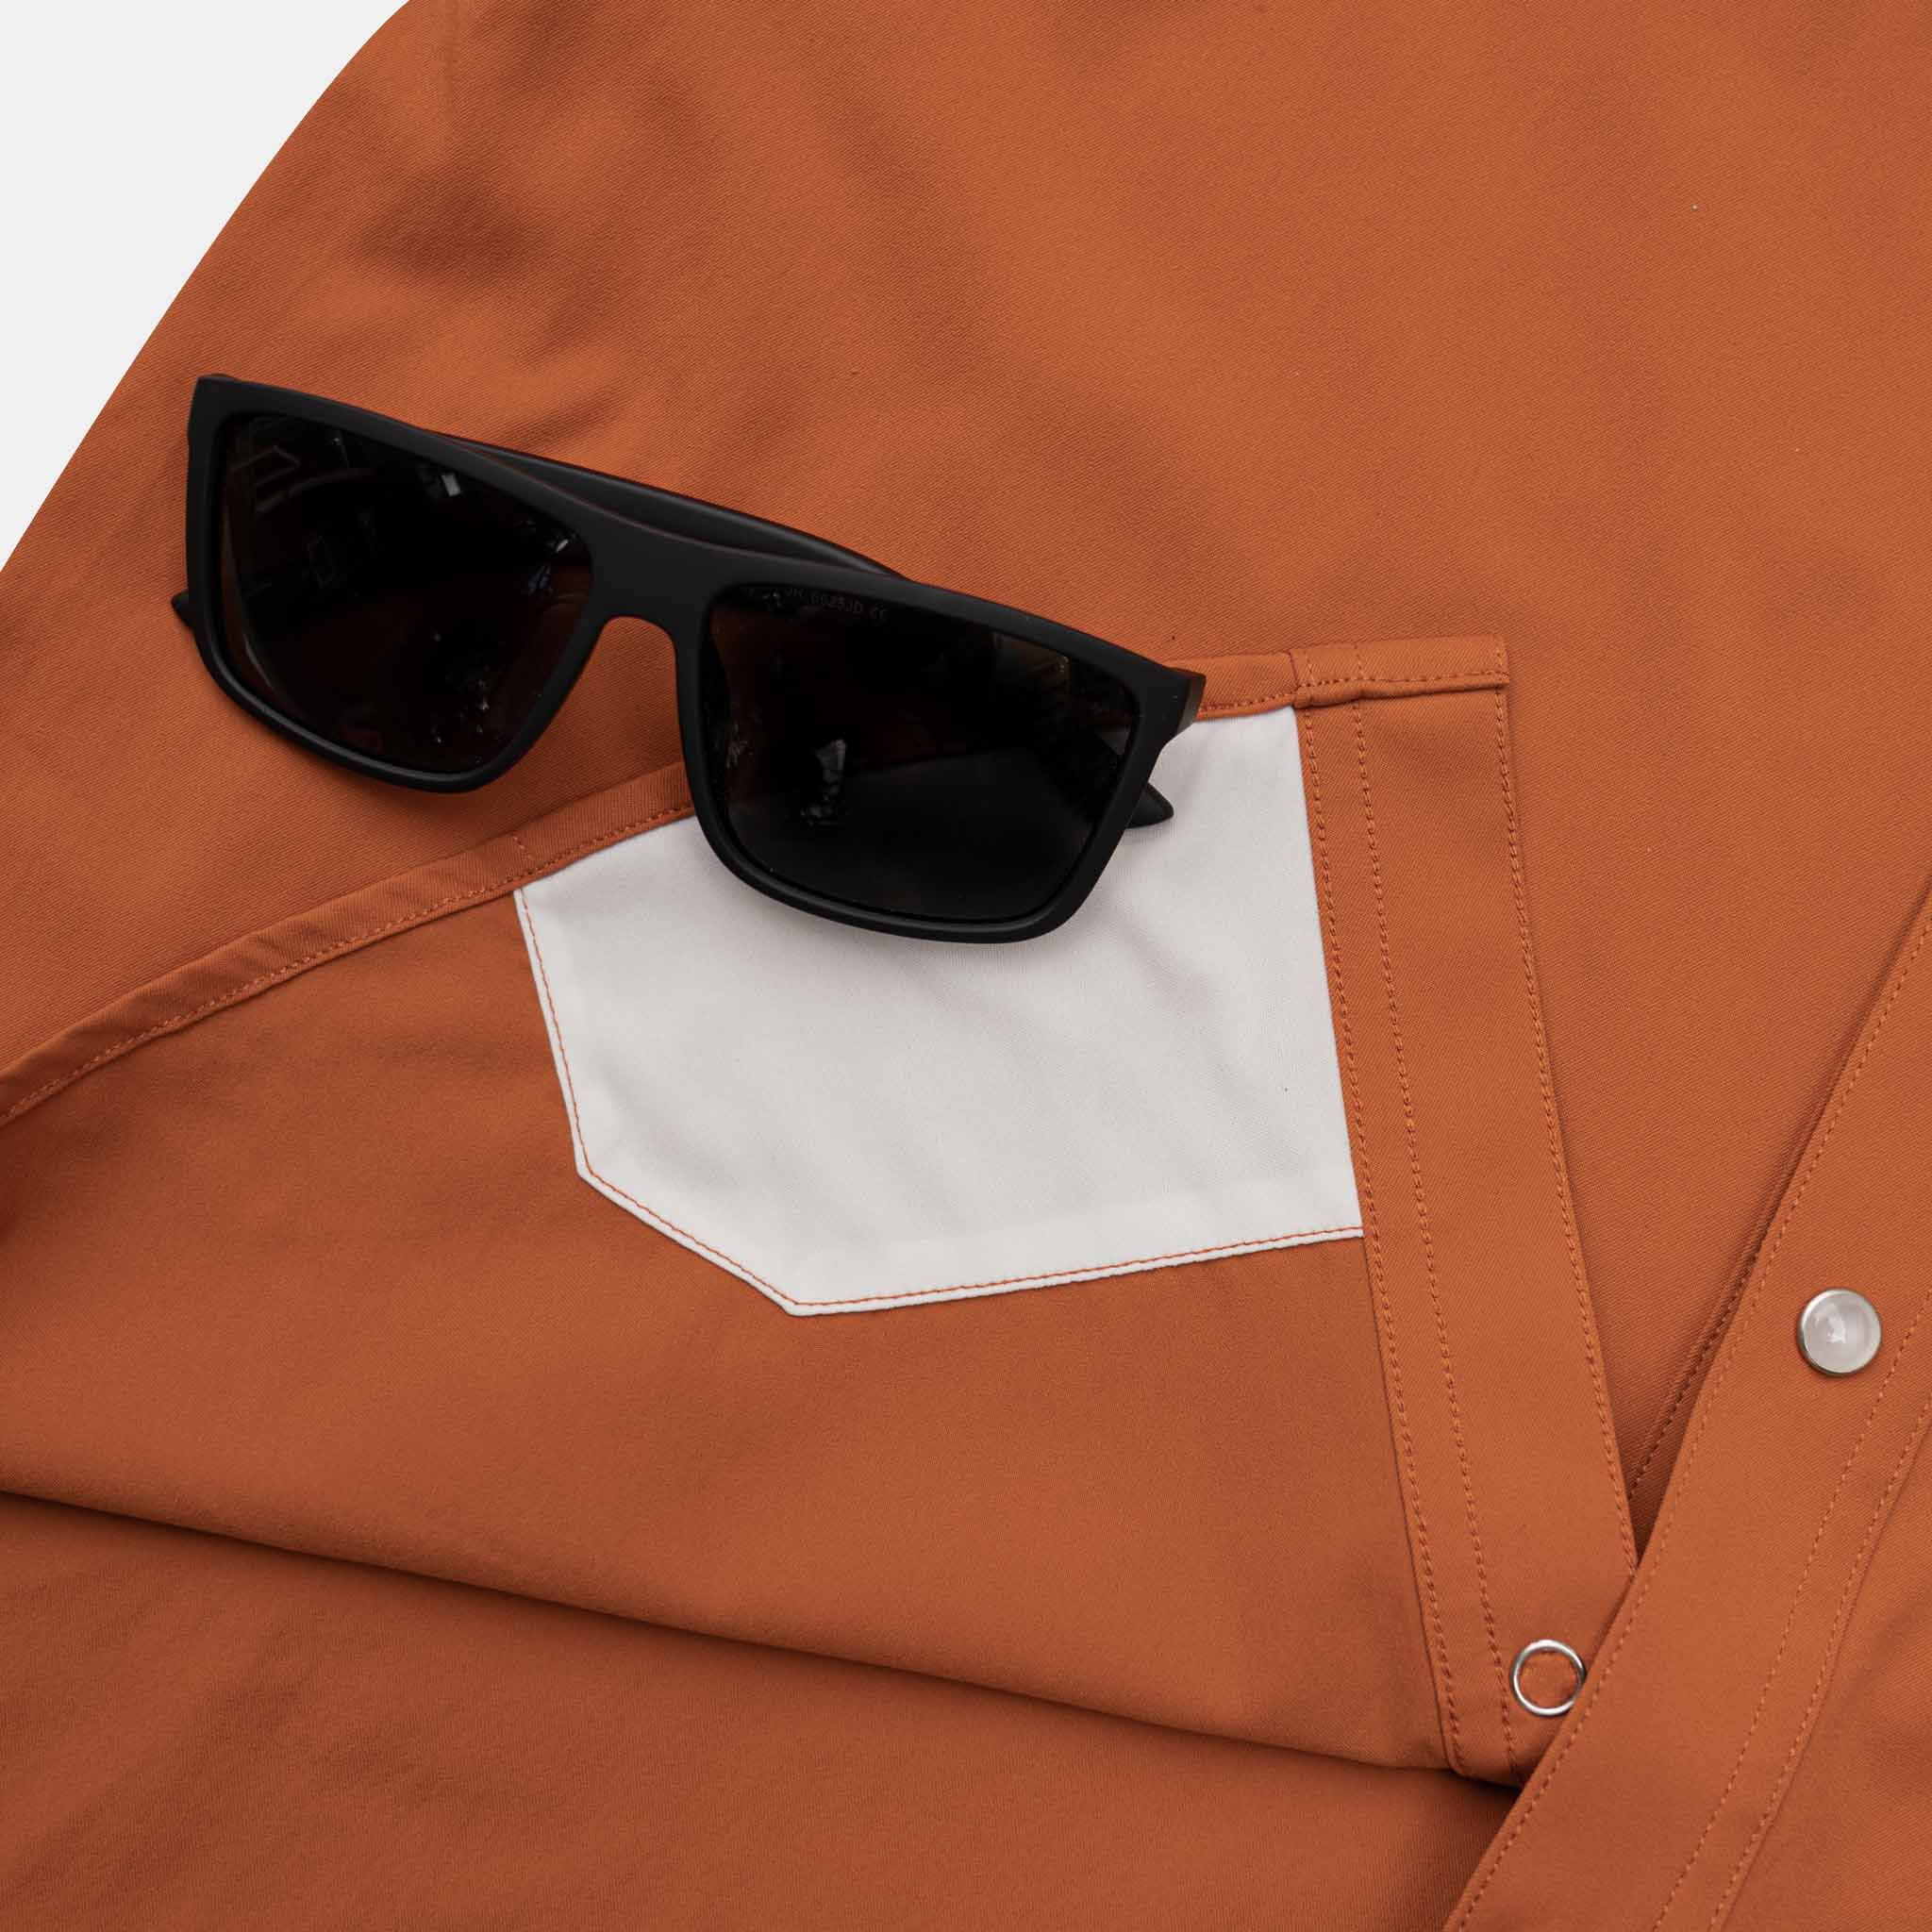 Close up of sunglasses on top of the lens cloth on the burnt orange shirt